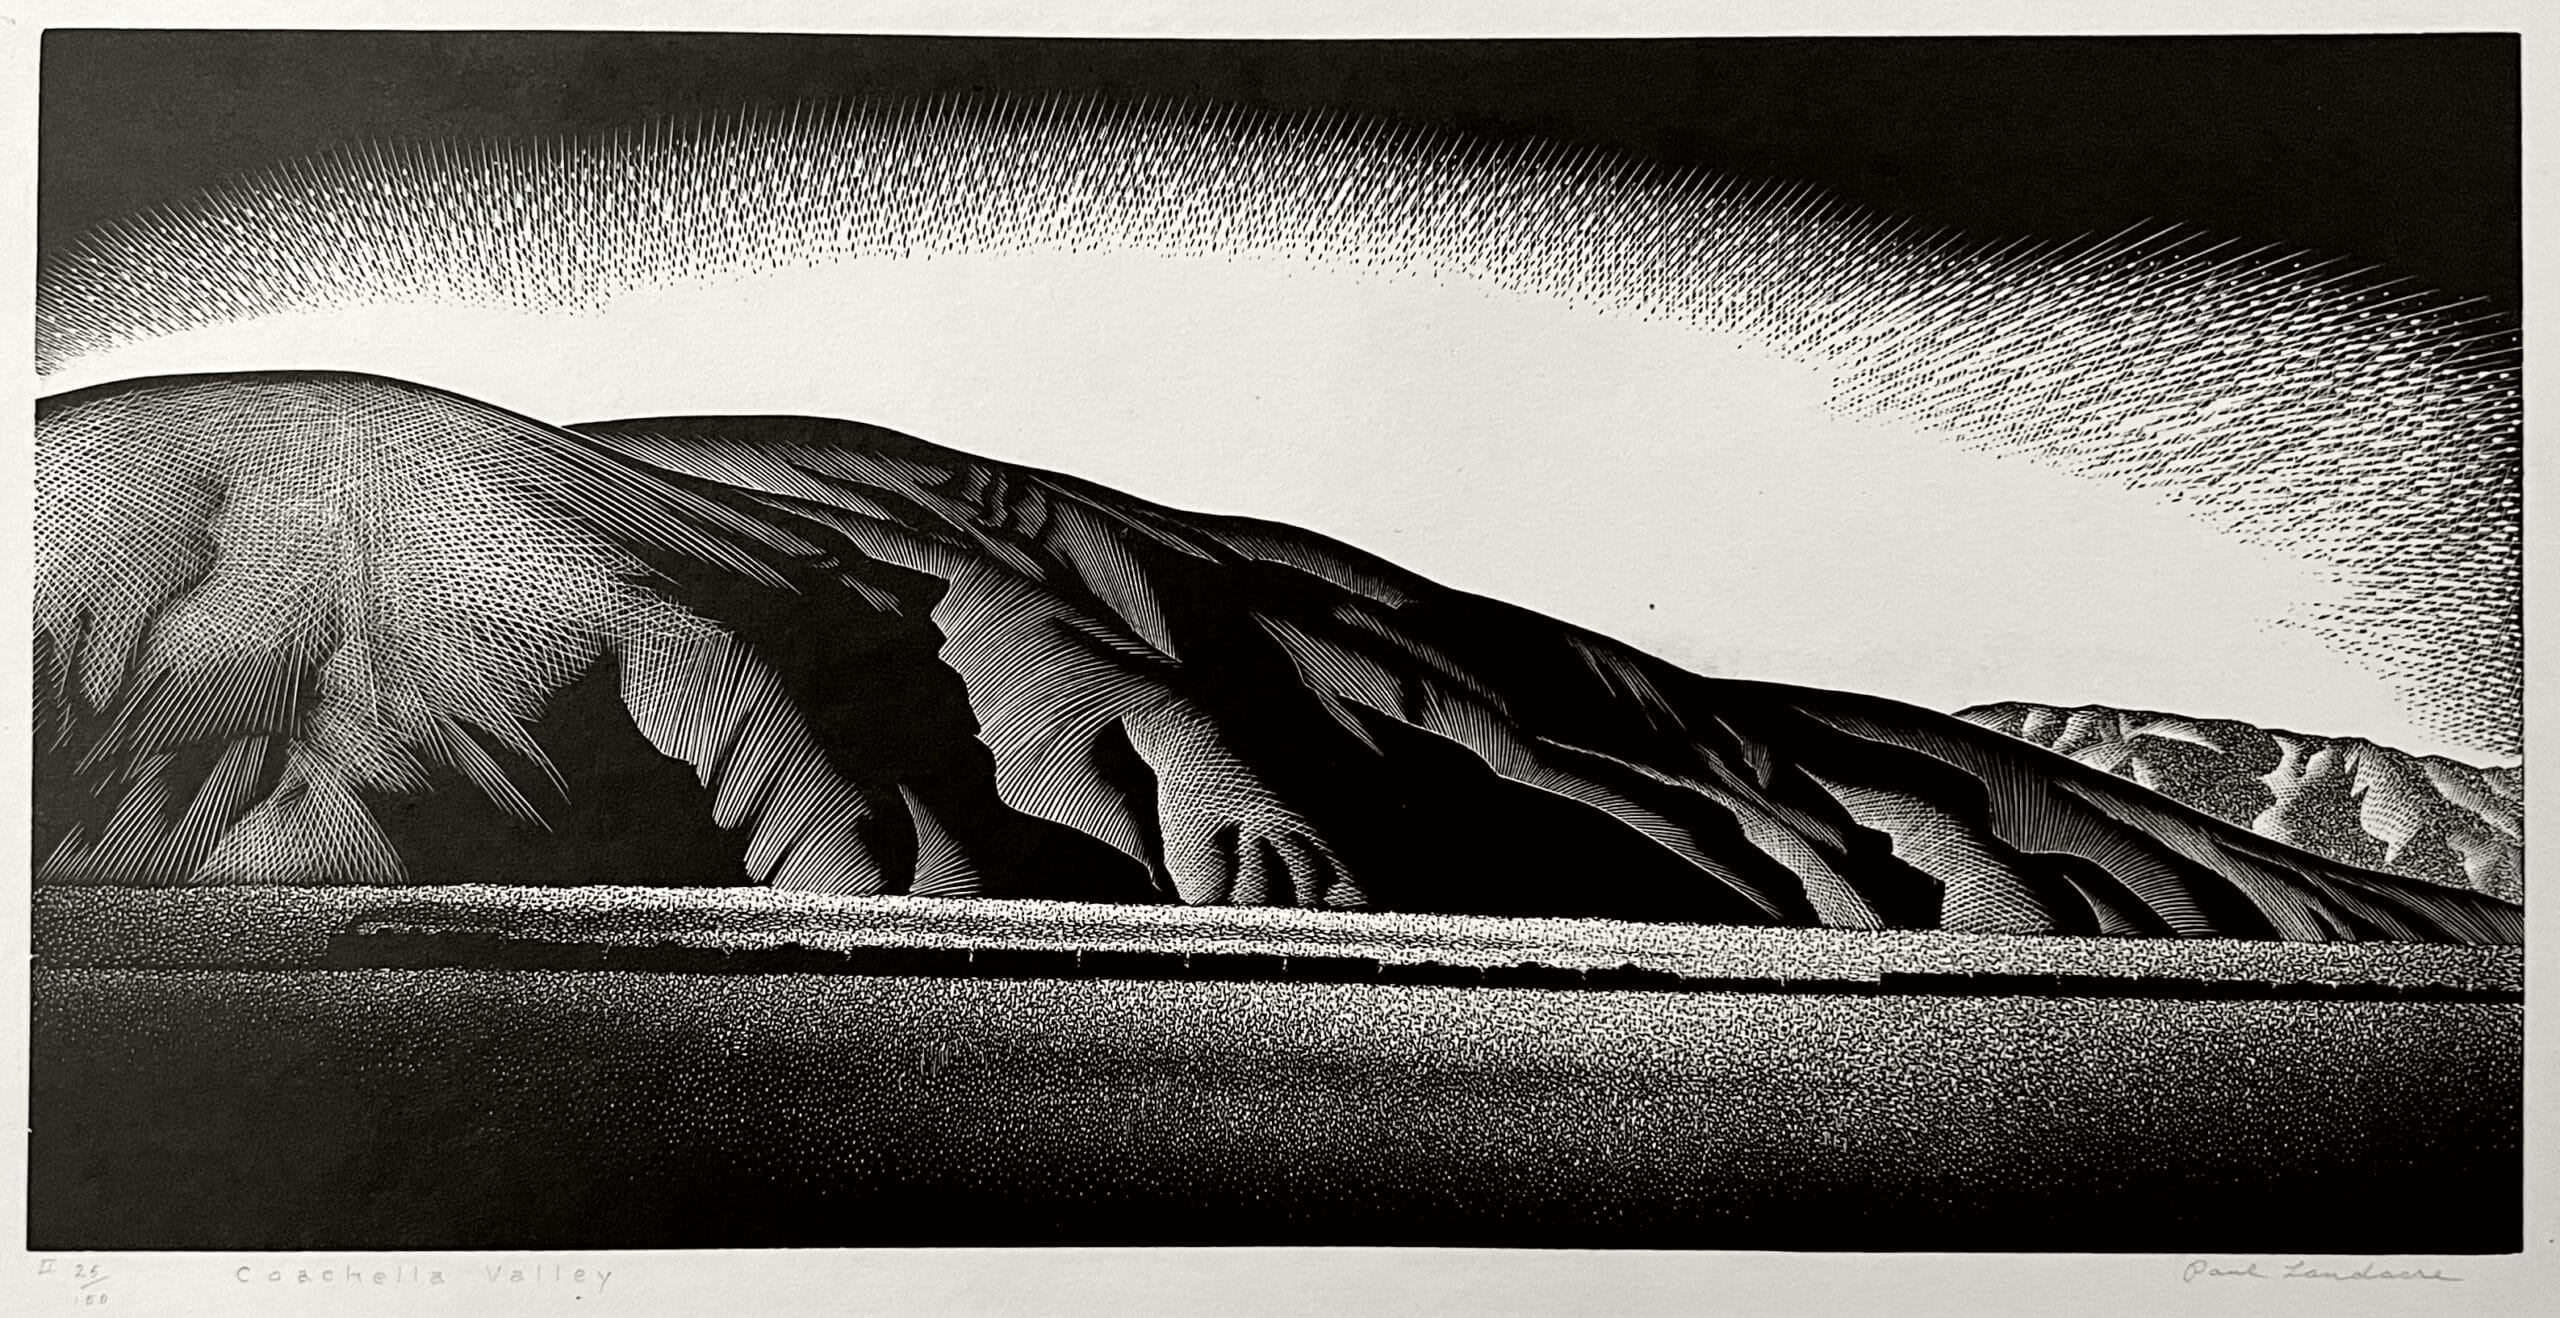 Black and white lithograph image of train rolling through Coachella Valley landscape of California. Rugged mountains serve as the backdrop as we see a small puff of smoke escape the train engine.